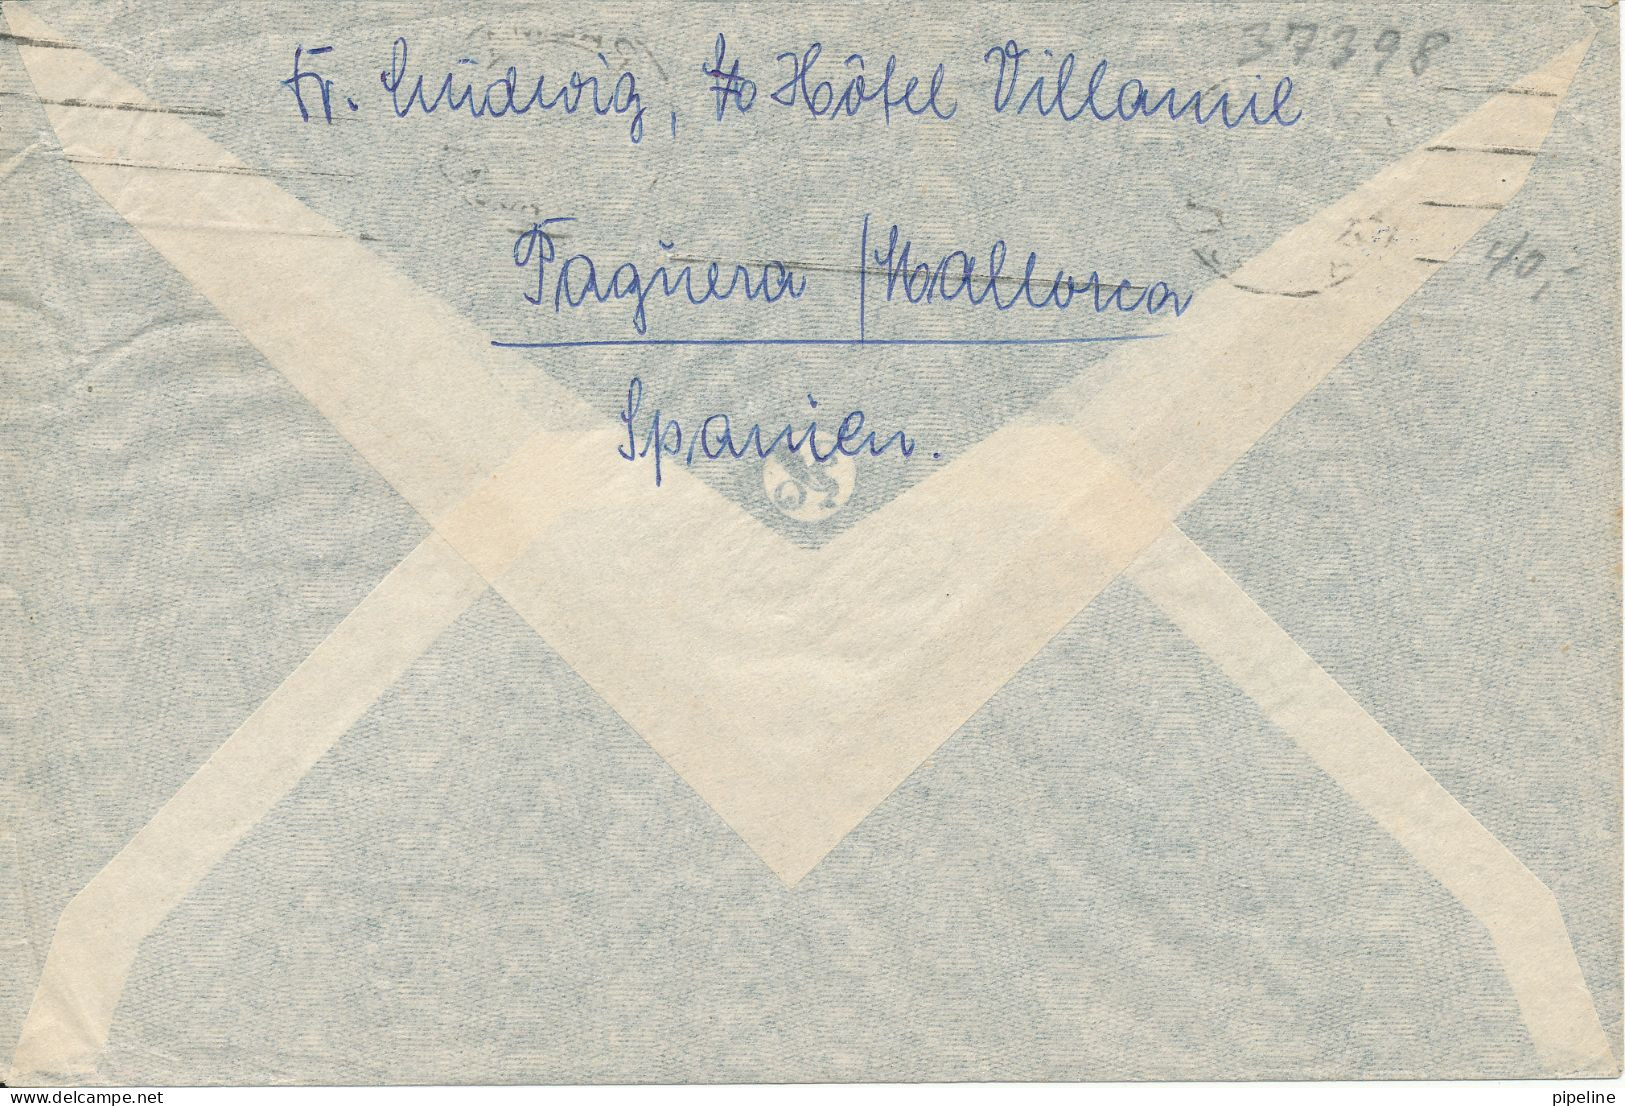 Spain Air Mail Cover Sent To Germany Good Single Franked - Briefe U. Dokumente